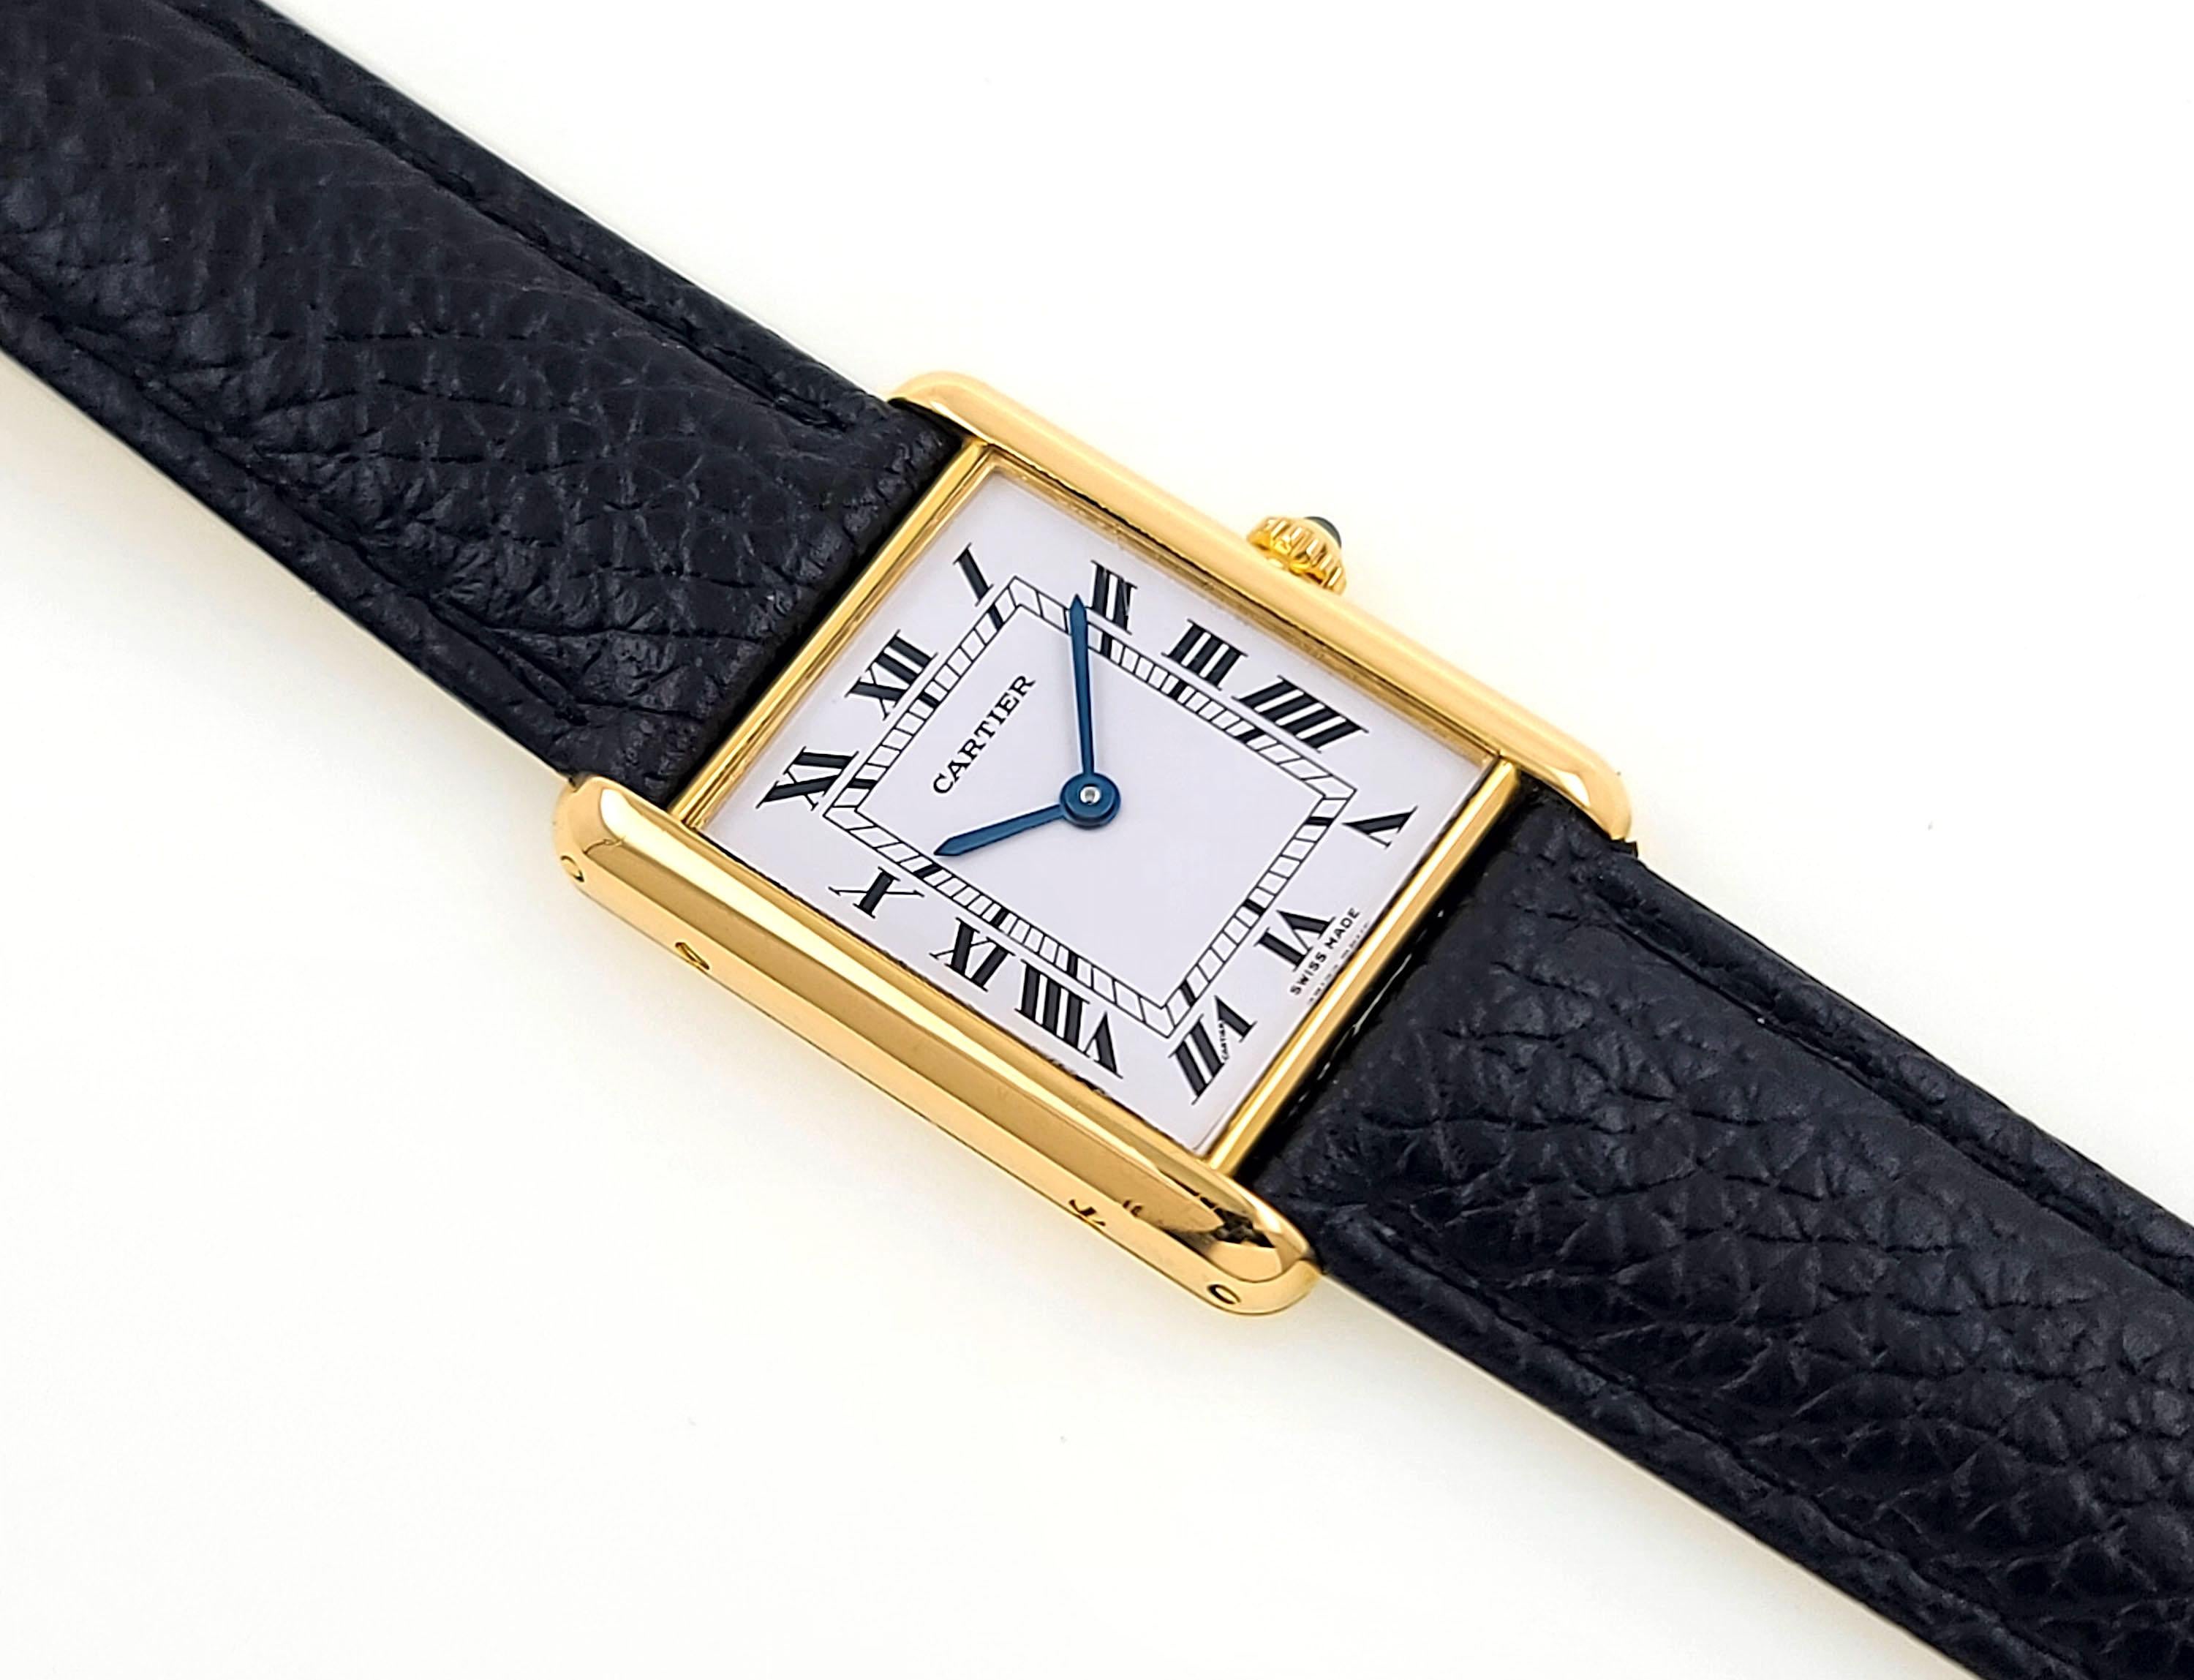 CARTIER 
Founded in 1847 

For the discerning few 

Wear Cartier watch it's integrate the club of famous clients : Jackie Kennedy, Princess Diana, the Duchess of Windsor, Princess Grace, Barbara Hutton, Elizabeth Taylor, Andy Warhol, Yves Saint